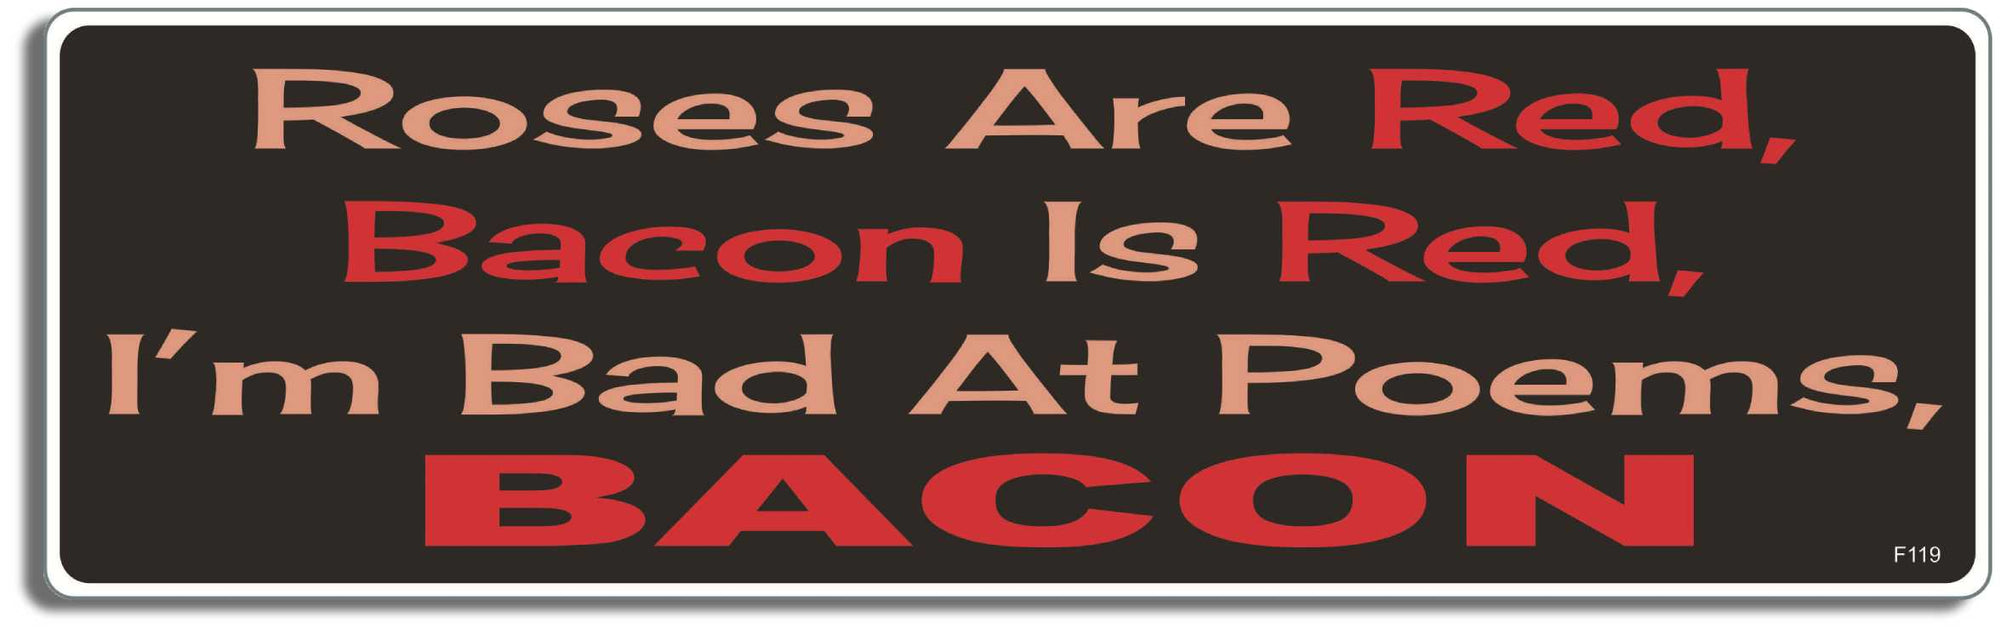 Roses are red, bacon is red, I'm bad at poems, BACON - 3" x 10" Bumper Sticker--Car Magnet- -  Decal Bumper Sticker-funny Bumper Sticker Car Magnet Roses are red, bacon is red, I'm-  Decal for carsBacon